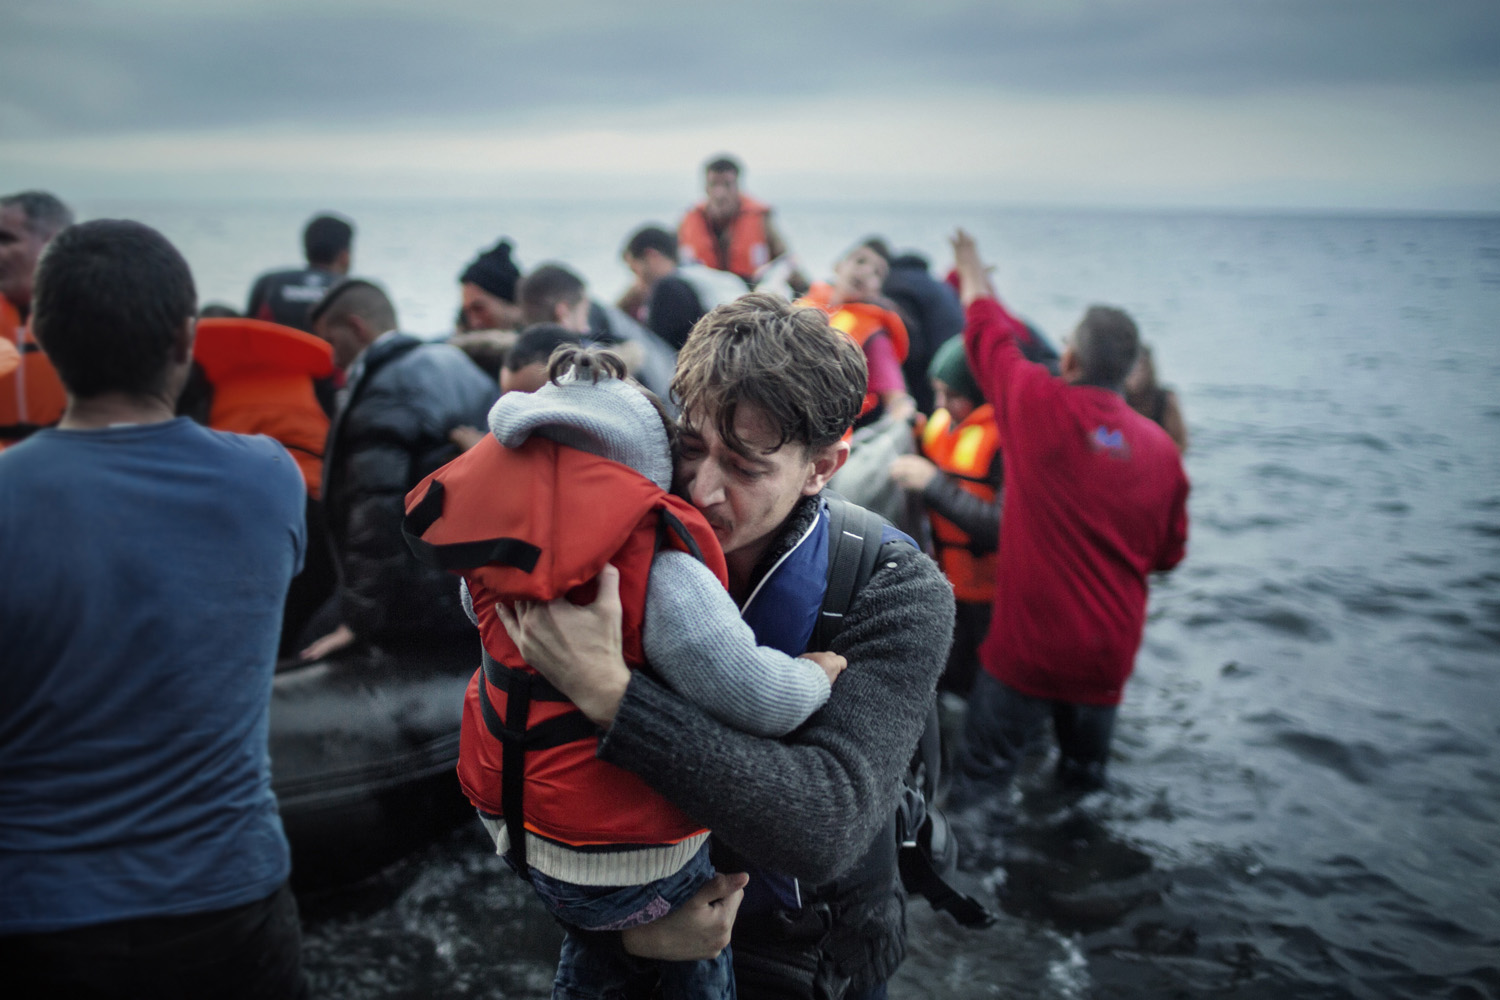 Lesbos. Greece. Oct. 21, 2015.  A  father hugs his young daughter as they land on the Greek island of Lesbos,  after crossing the Aegean sea from the Turkish coast  He later said they were afraid during the trip because of the bad weather.According to UNHCR, approximately 850,000 refugees and migrants, including children, arrived in Greece by sea in 2015. Of these, just over 500,000 landed on Lesbos, a Greek island around eight nautical miles from the Turkish coast.  Although at the centre of migration flows, Lesbos had nothing to offer the mainly Syrian, Afghan and Iraqi refugees, asylum seekers and migrants who arrived there. Once they reached Europe’s beaches, they were welcomed with a long trek across the island’s mountainous interior, followed by days and nights spent in crowded refugee camps, where not even a place in a tent was guaranteed and where basic amenities such as toilets and showers were lacking. © Alessandro Penso